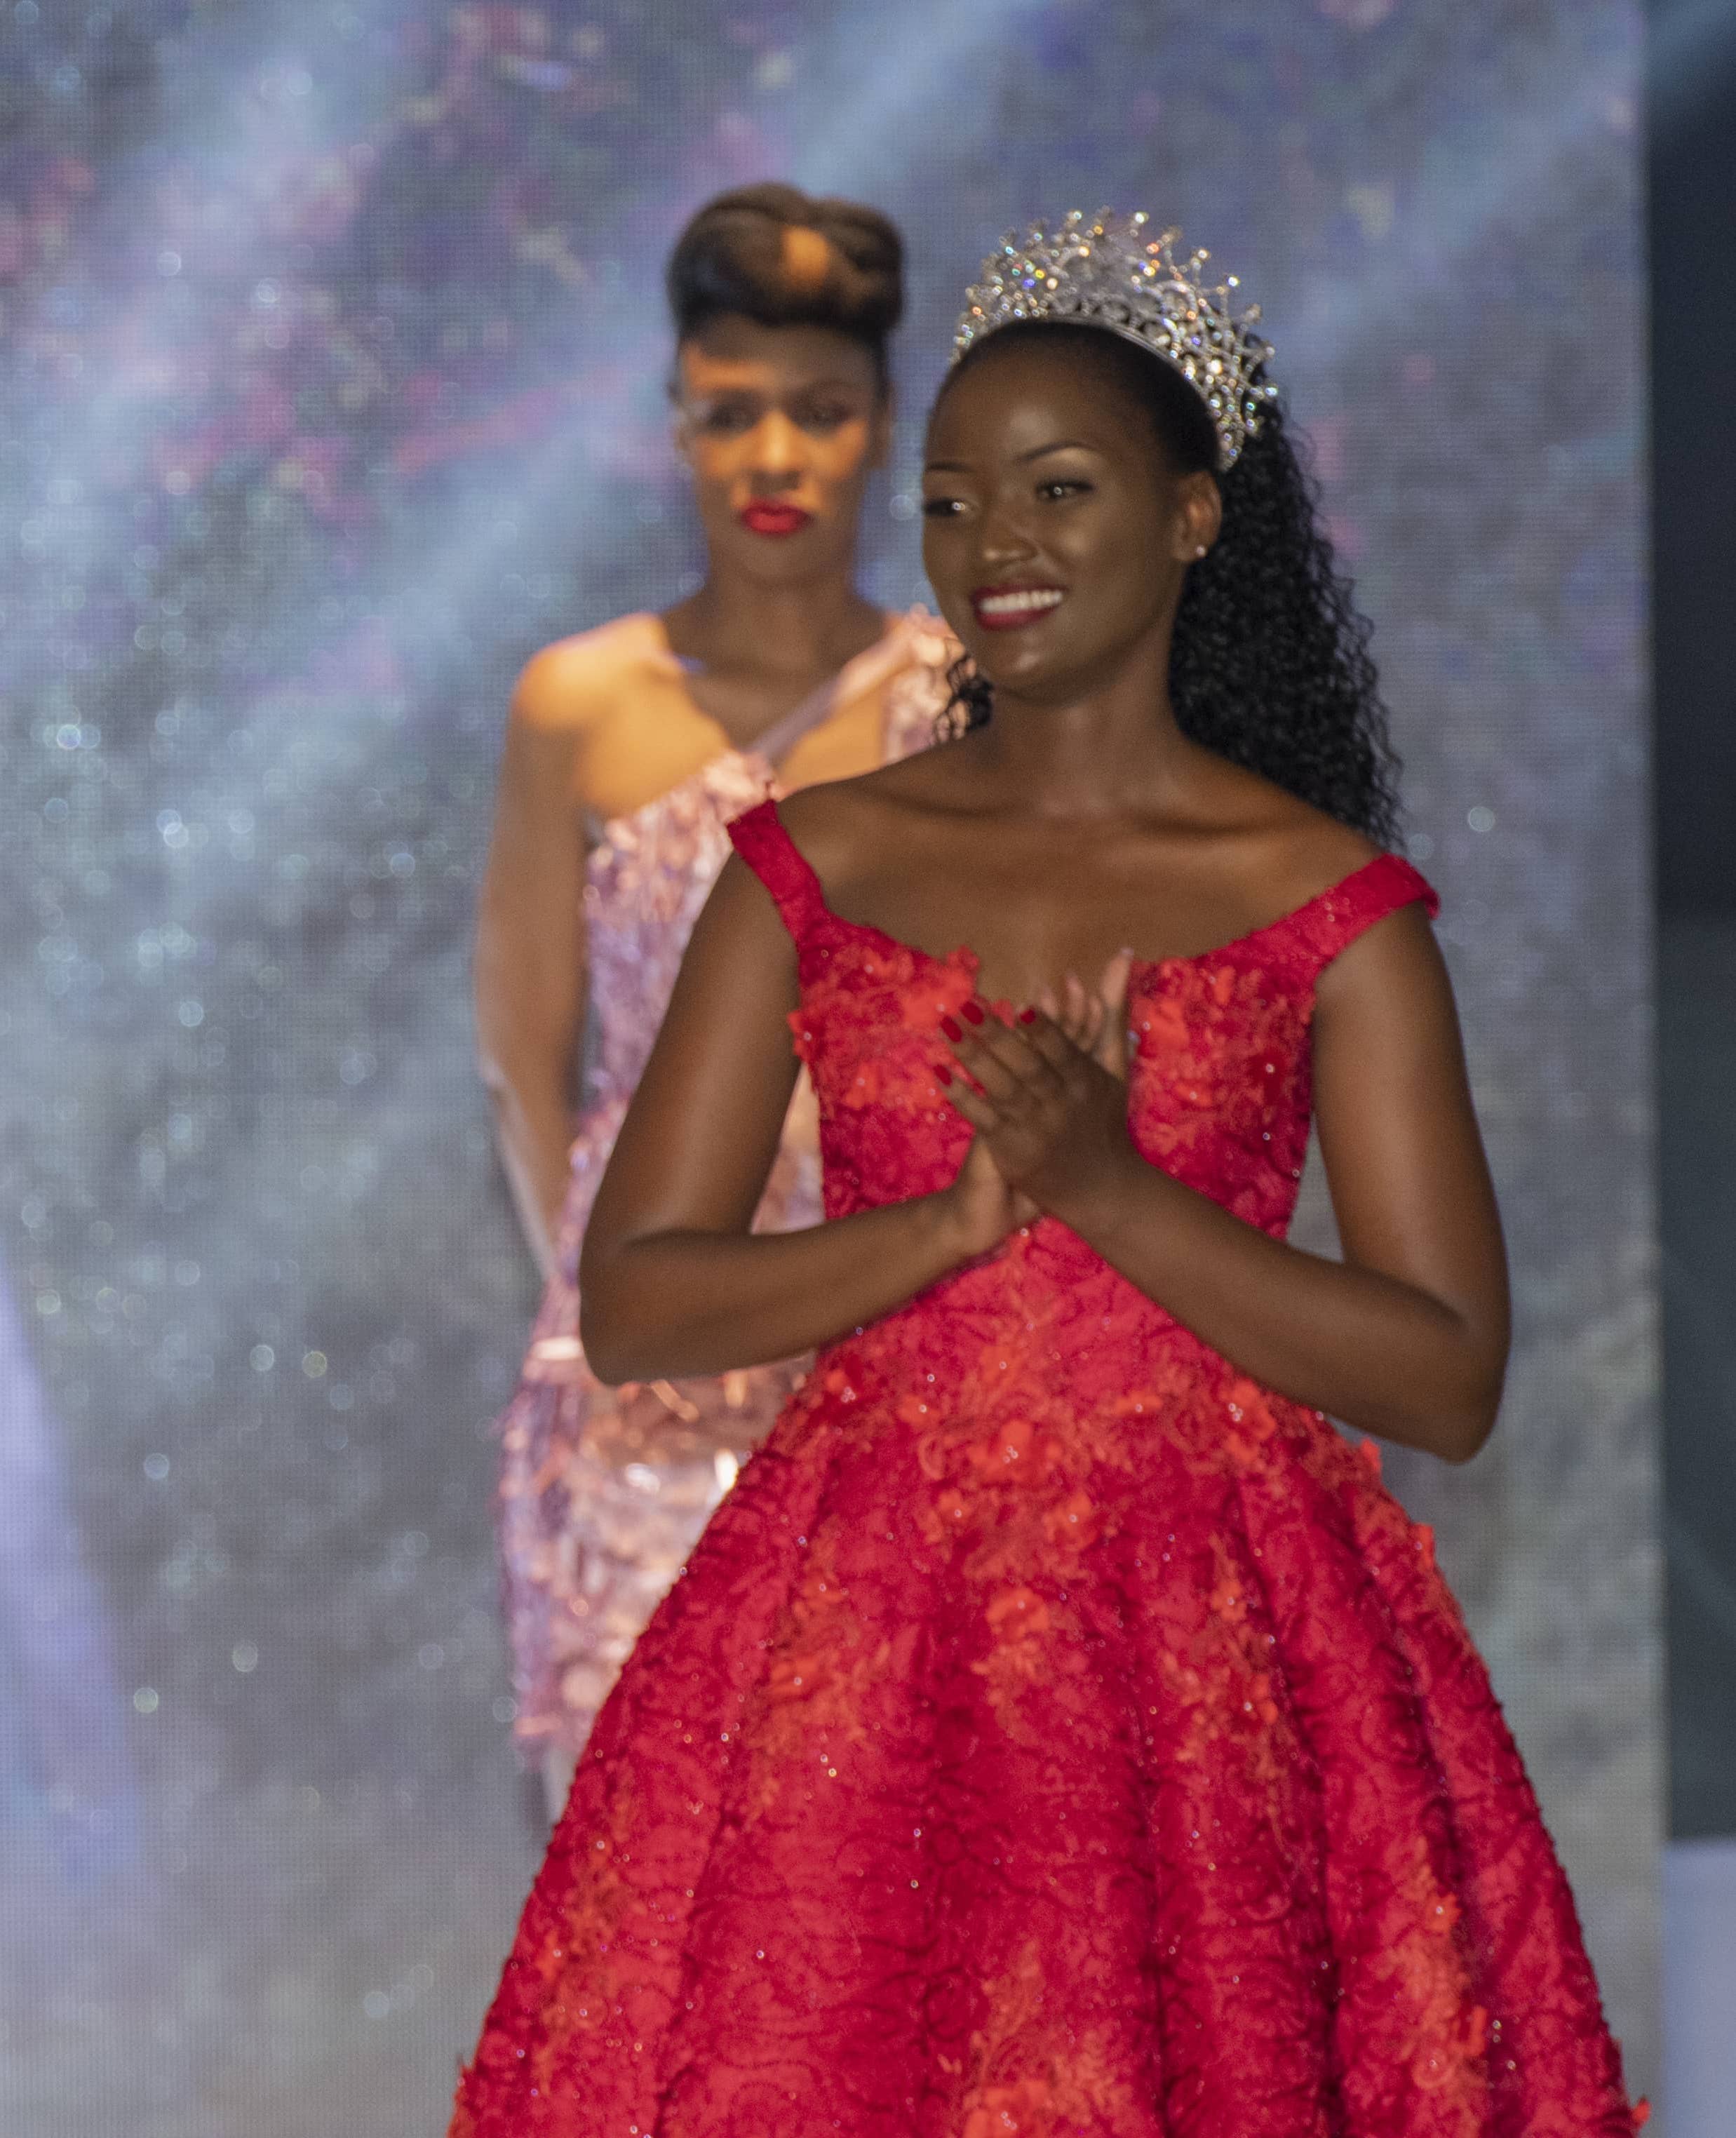 Miss Uganda, Quiin Abenakyo was crowned Miss World Africa at the Miss World 2018 finals in Sanya city, China.